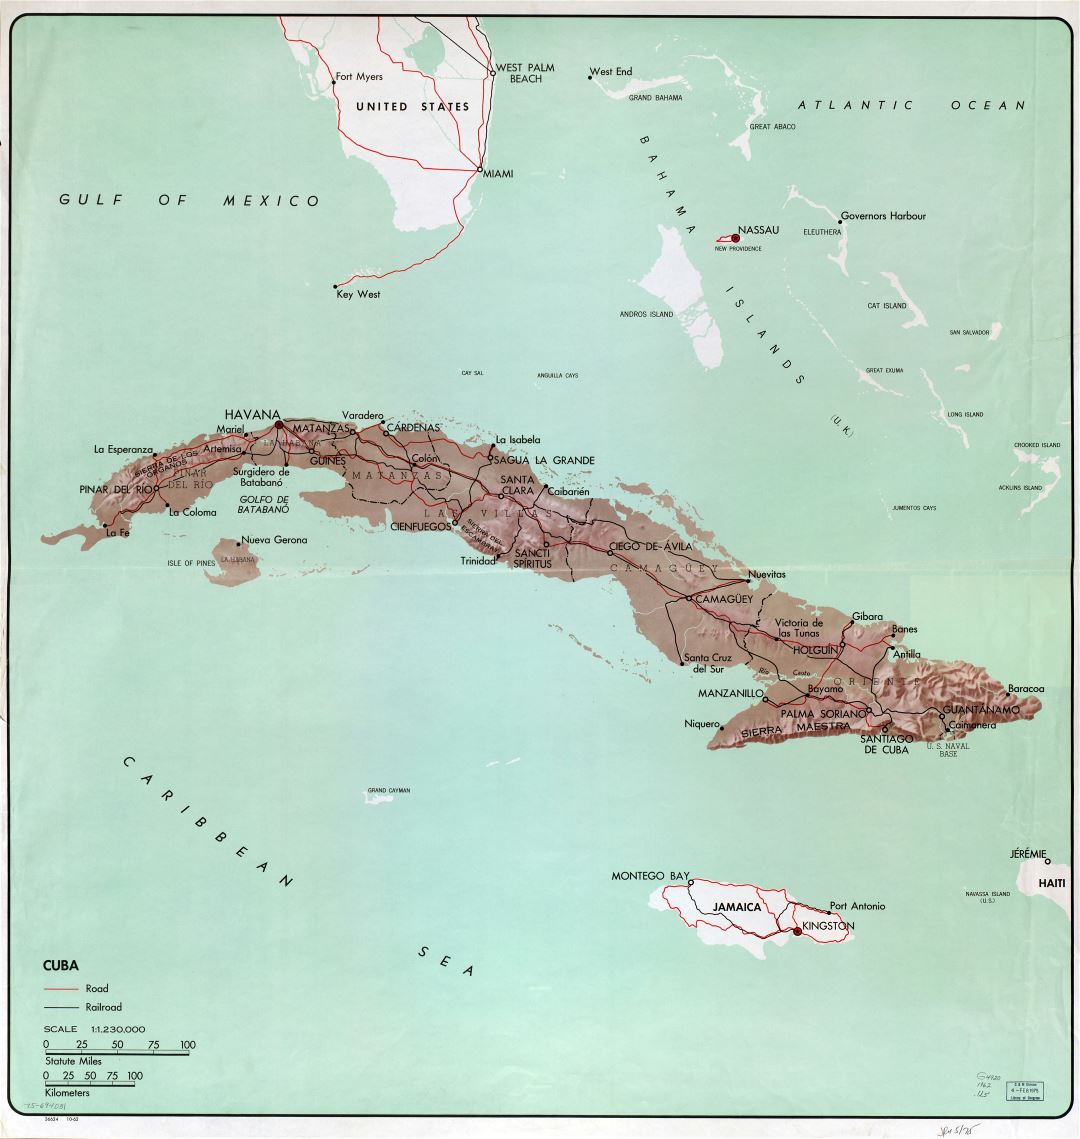 Large detailed political and administrative map of Cuba with relief, roads, railroads and major cities - 1962